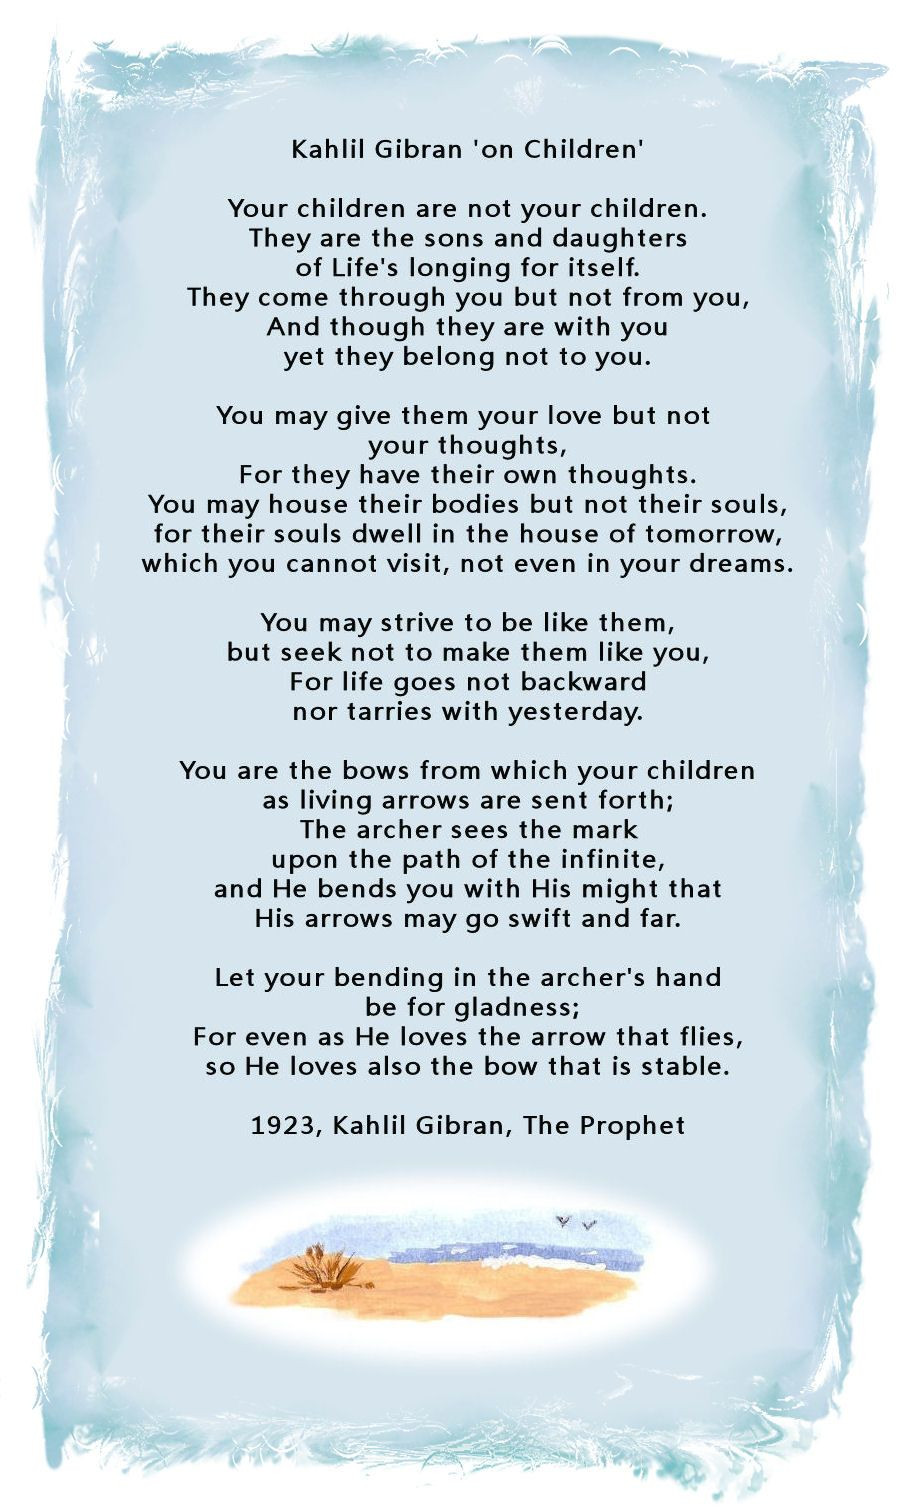 Kahlil Gibran Quotes On Children
 Children by Kahlil Gibran The Prophet 1923 There is